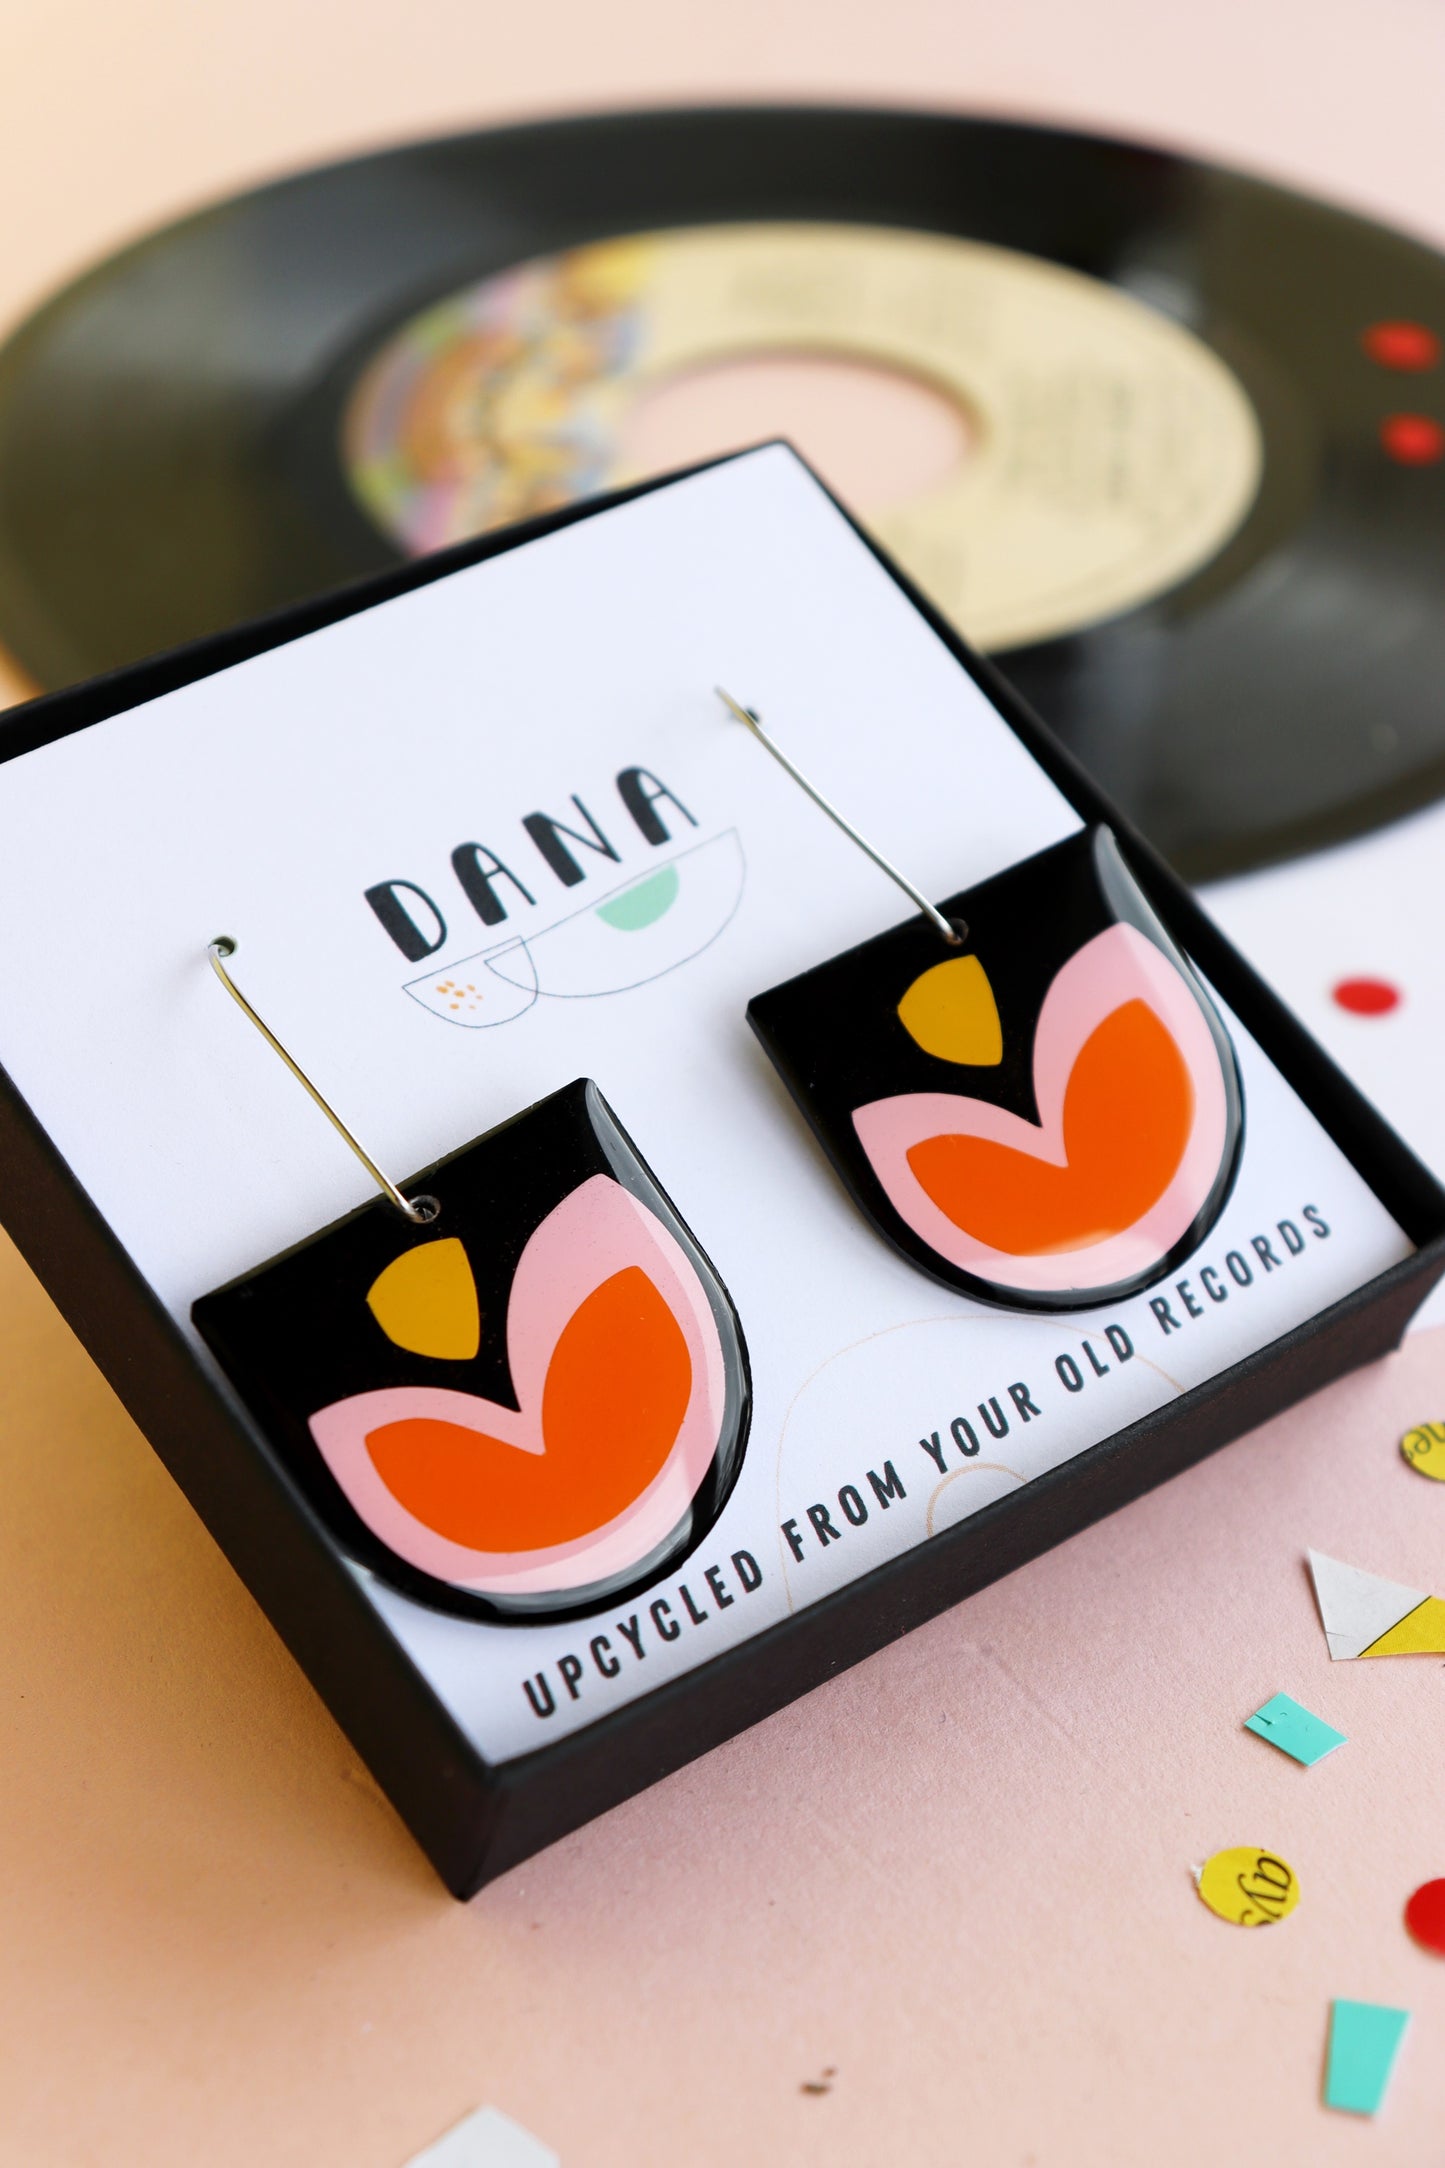 FLOR with a retro feel / upcycled vinyl record earrings